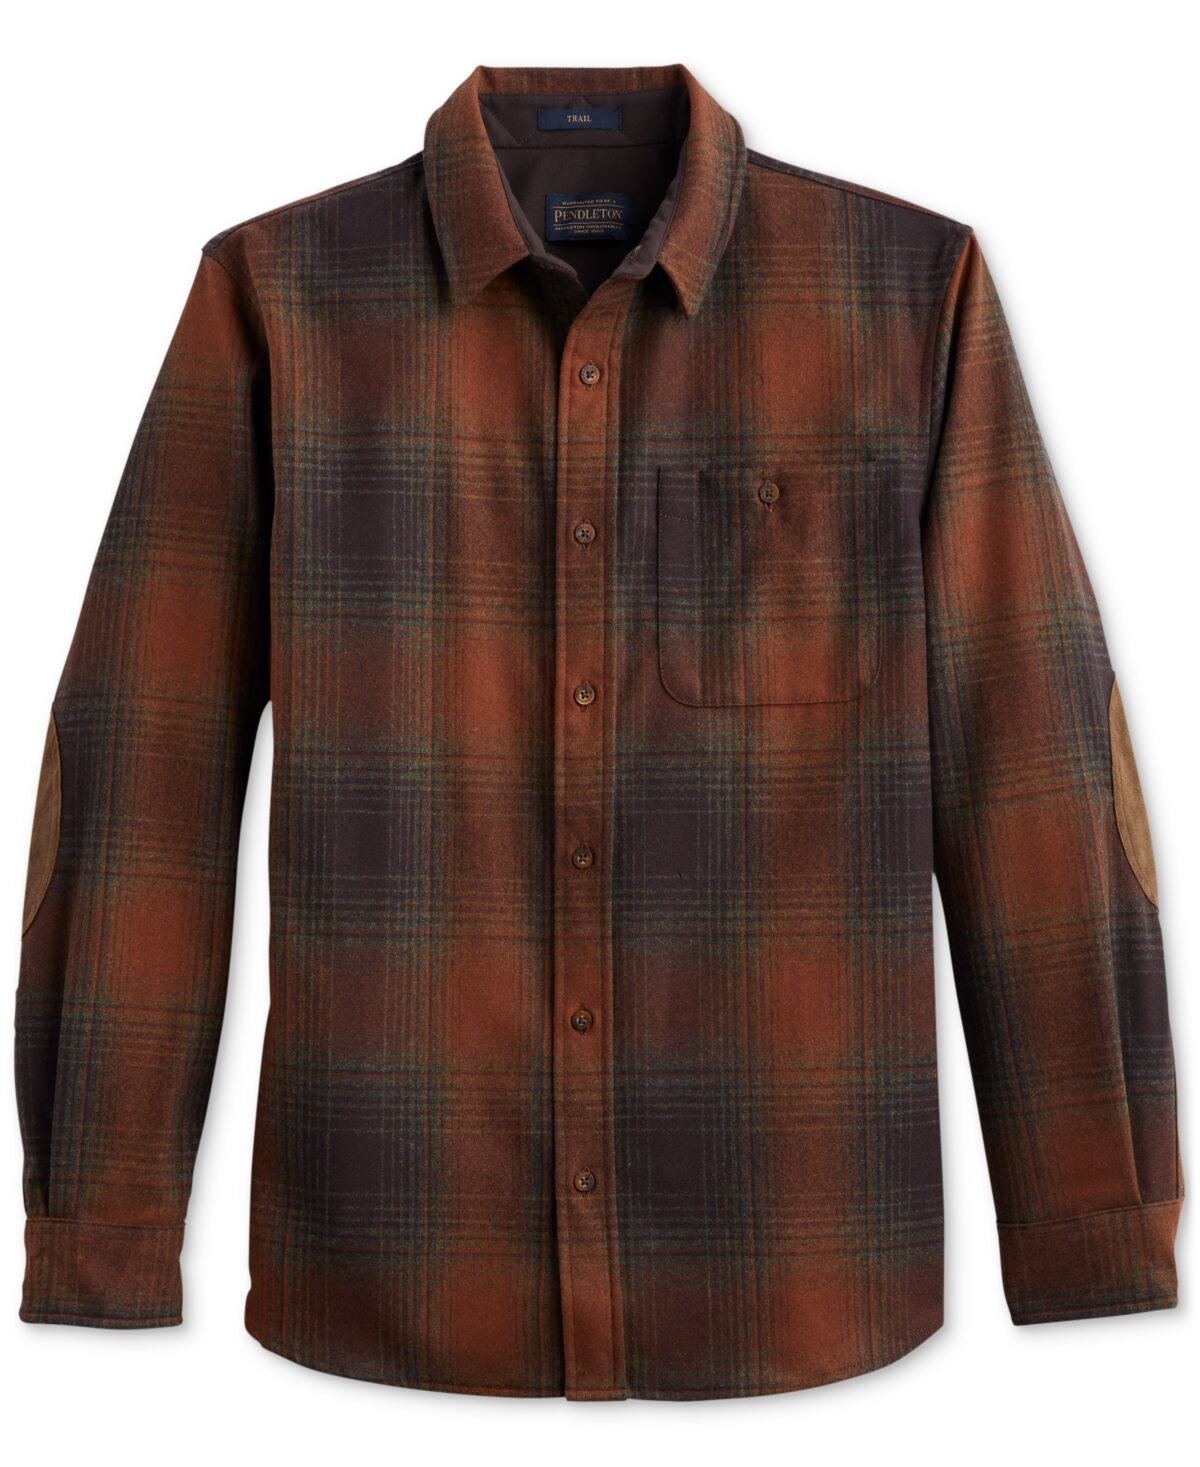 Pendleton Men's Trail Plaid Button-Down Wool Shirt with Faux-Suede Elbow Patches - Brown/green Mix Ombre